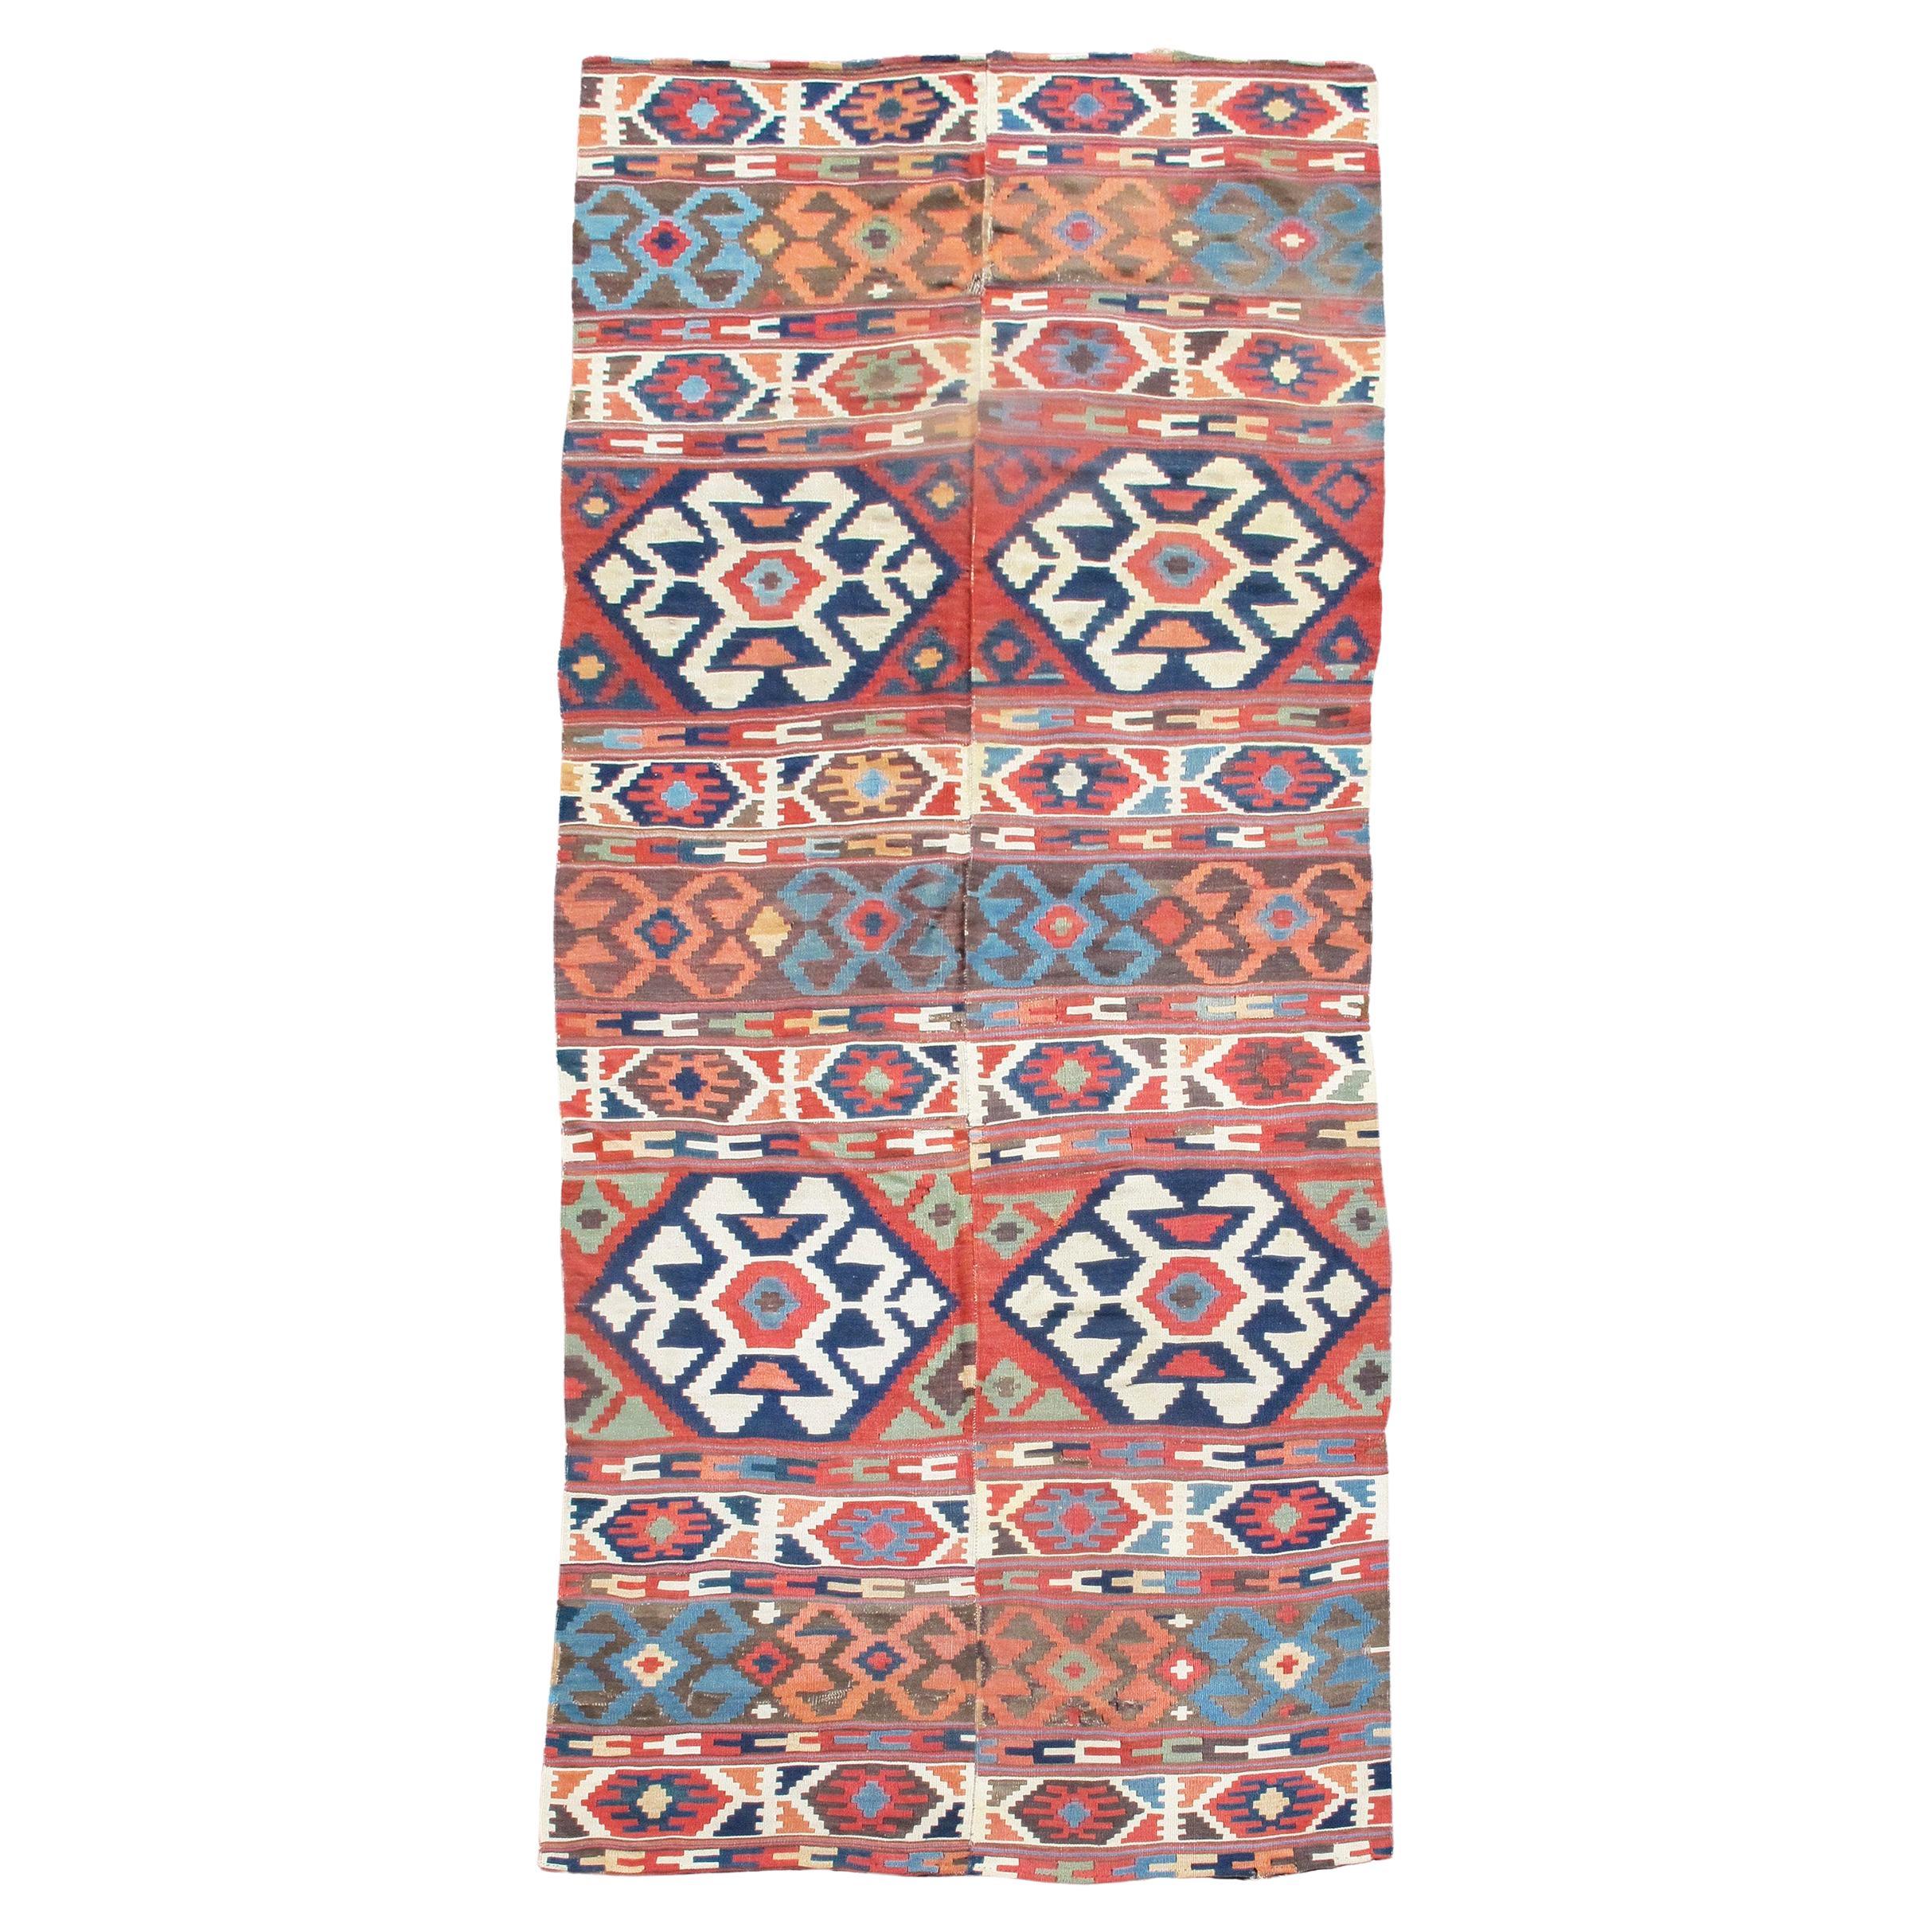 Antique Persian Shahsevan Kilim Rug, Late 19th Century For Sale